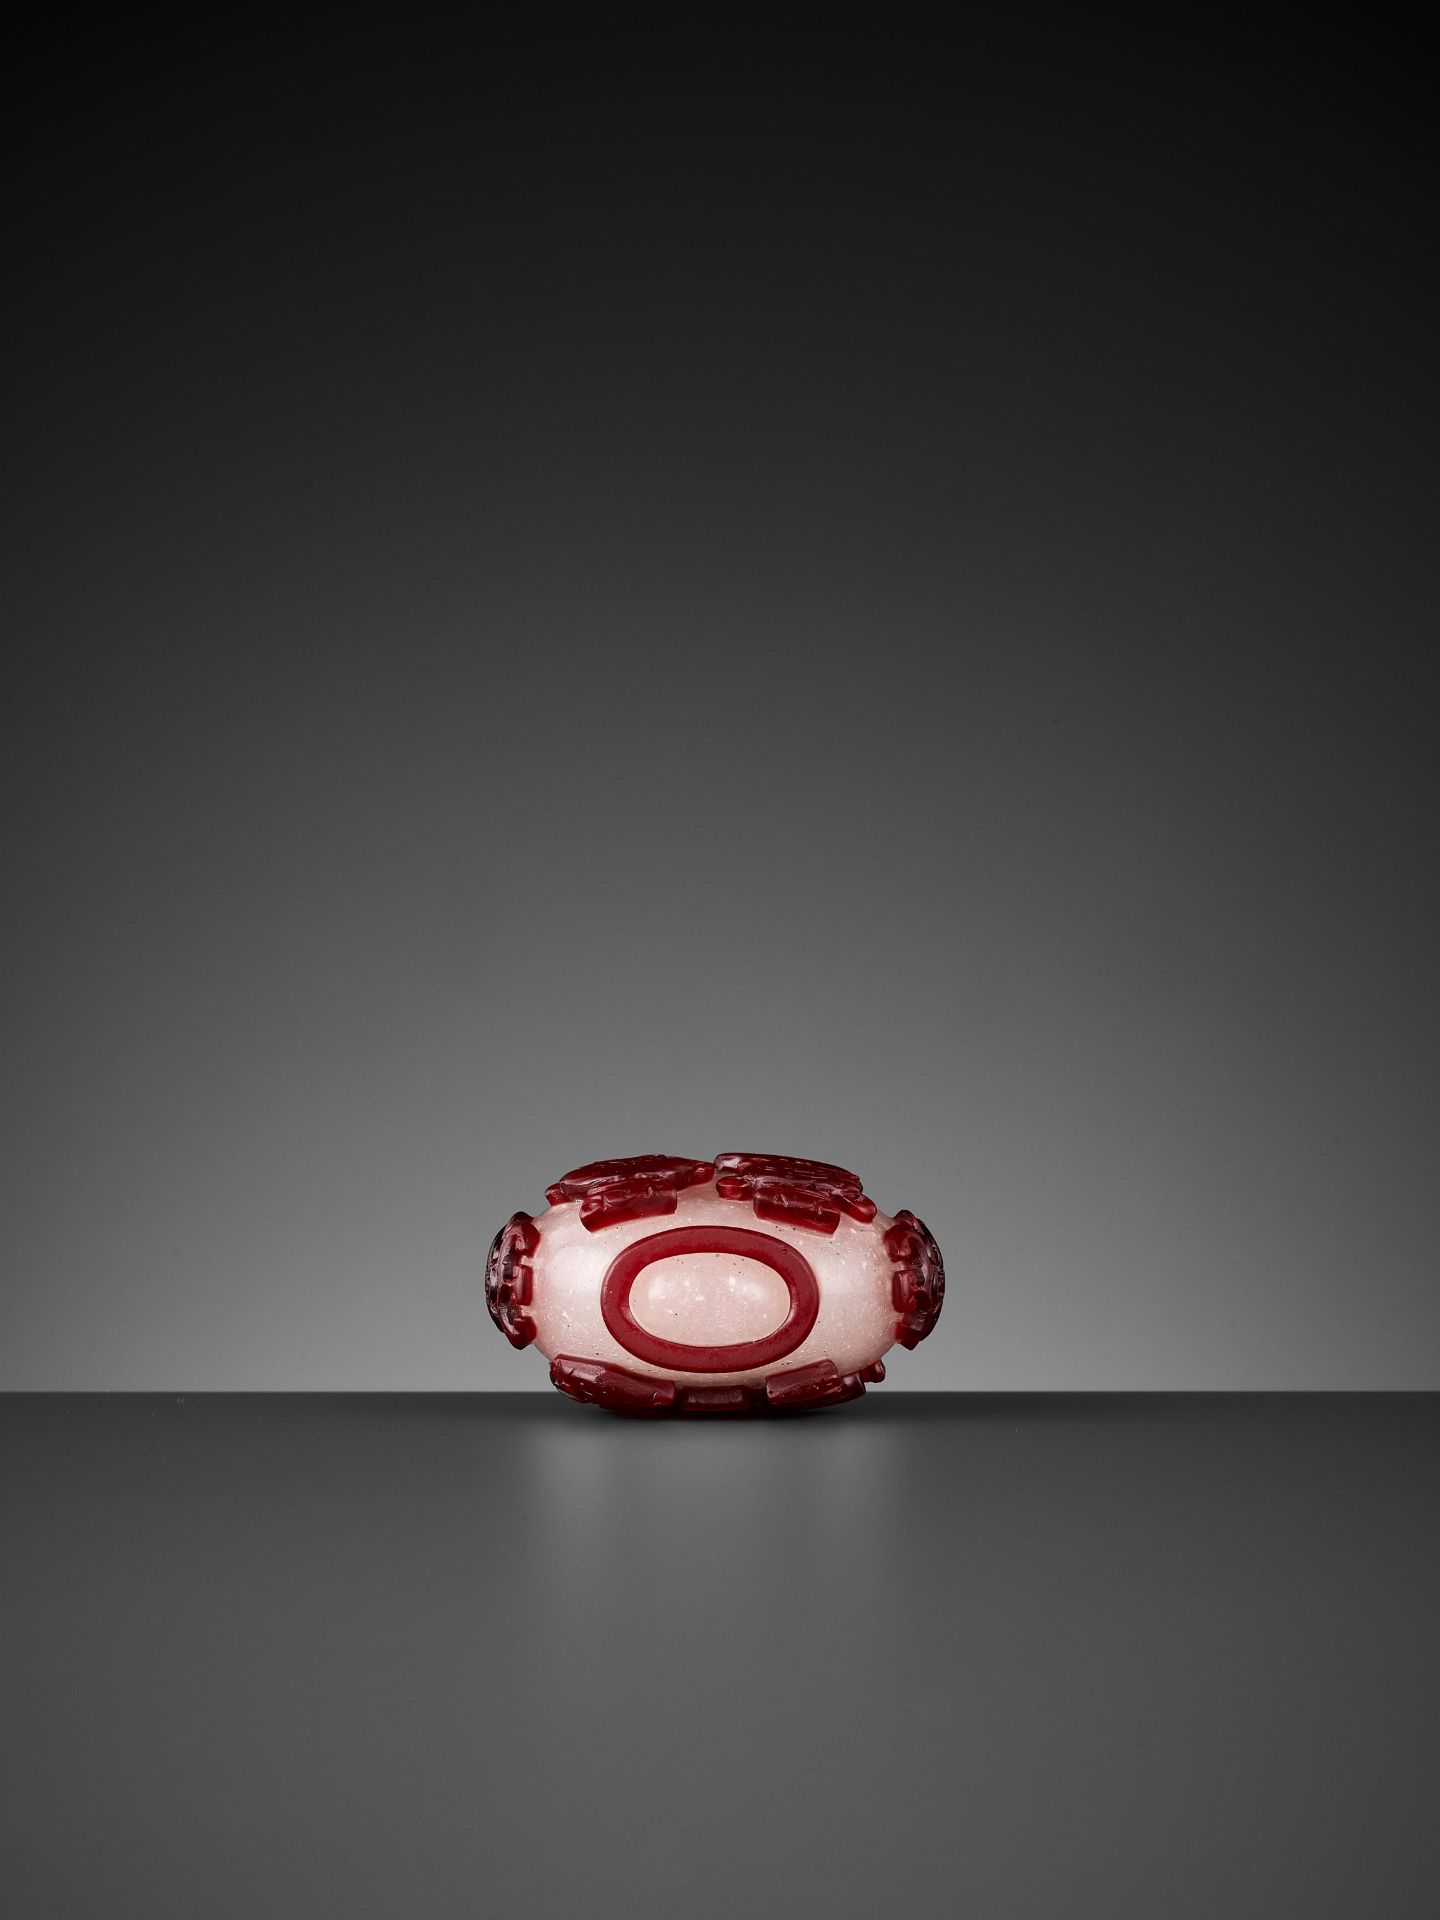 A RUBY-RED OVERLAY 'ANTIQUE TREASURES' GLASS SNUFF BOTTLE, QING DYNASTY - Image 7 of 7